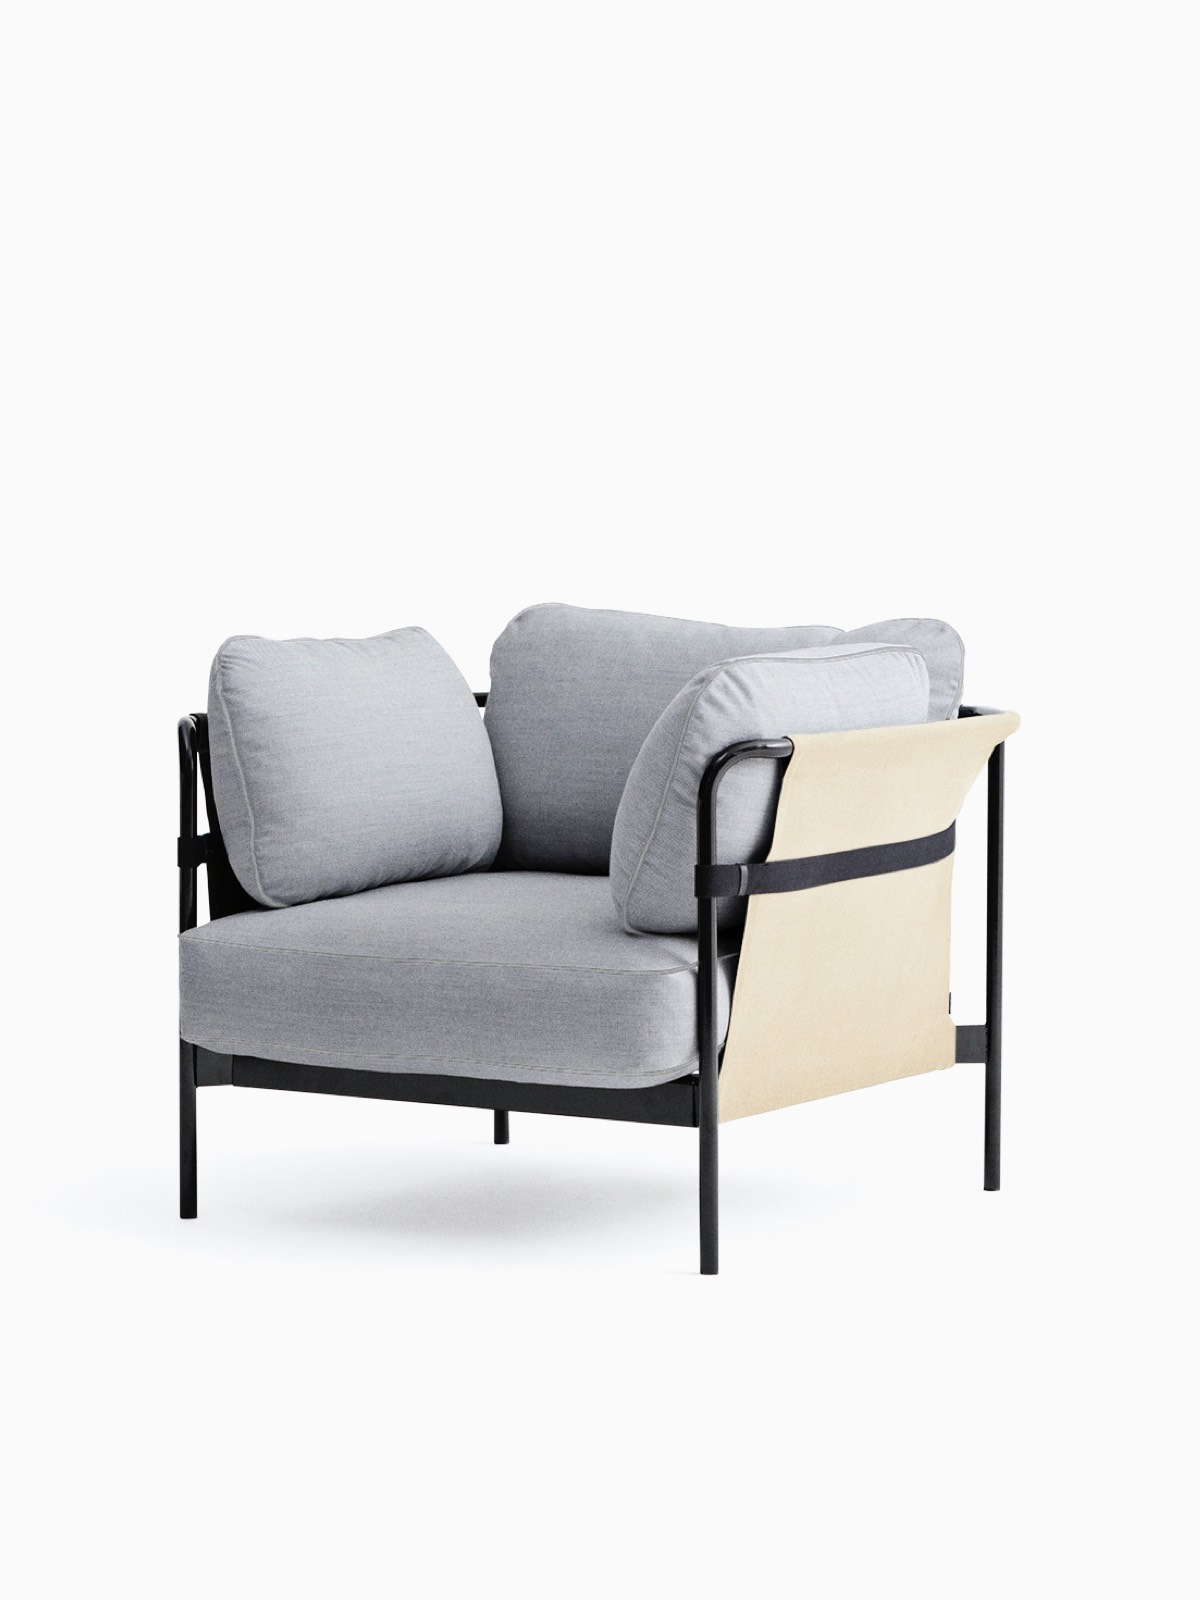 Lounge Chair Can